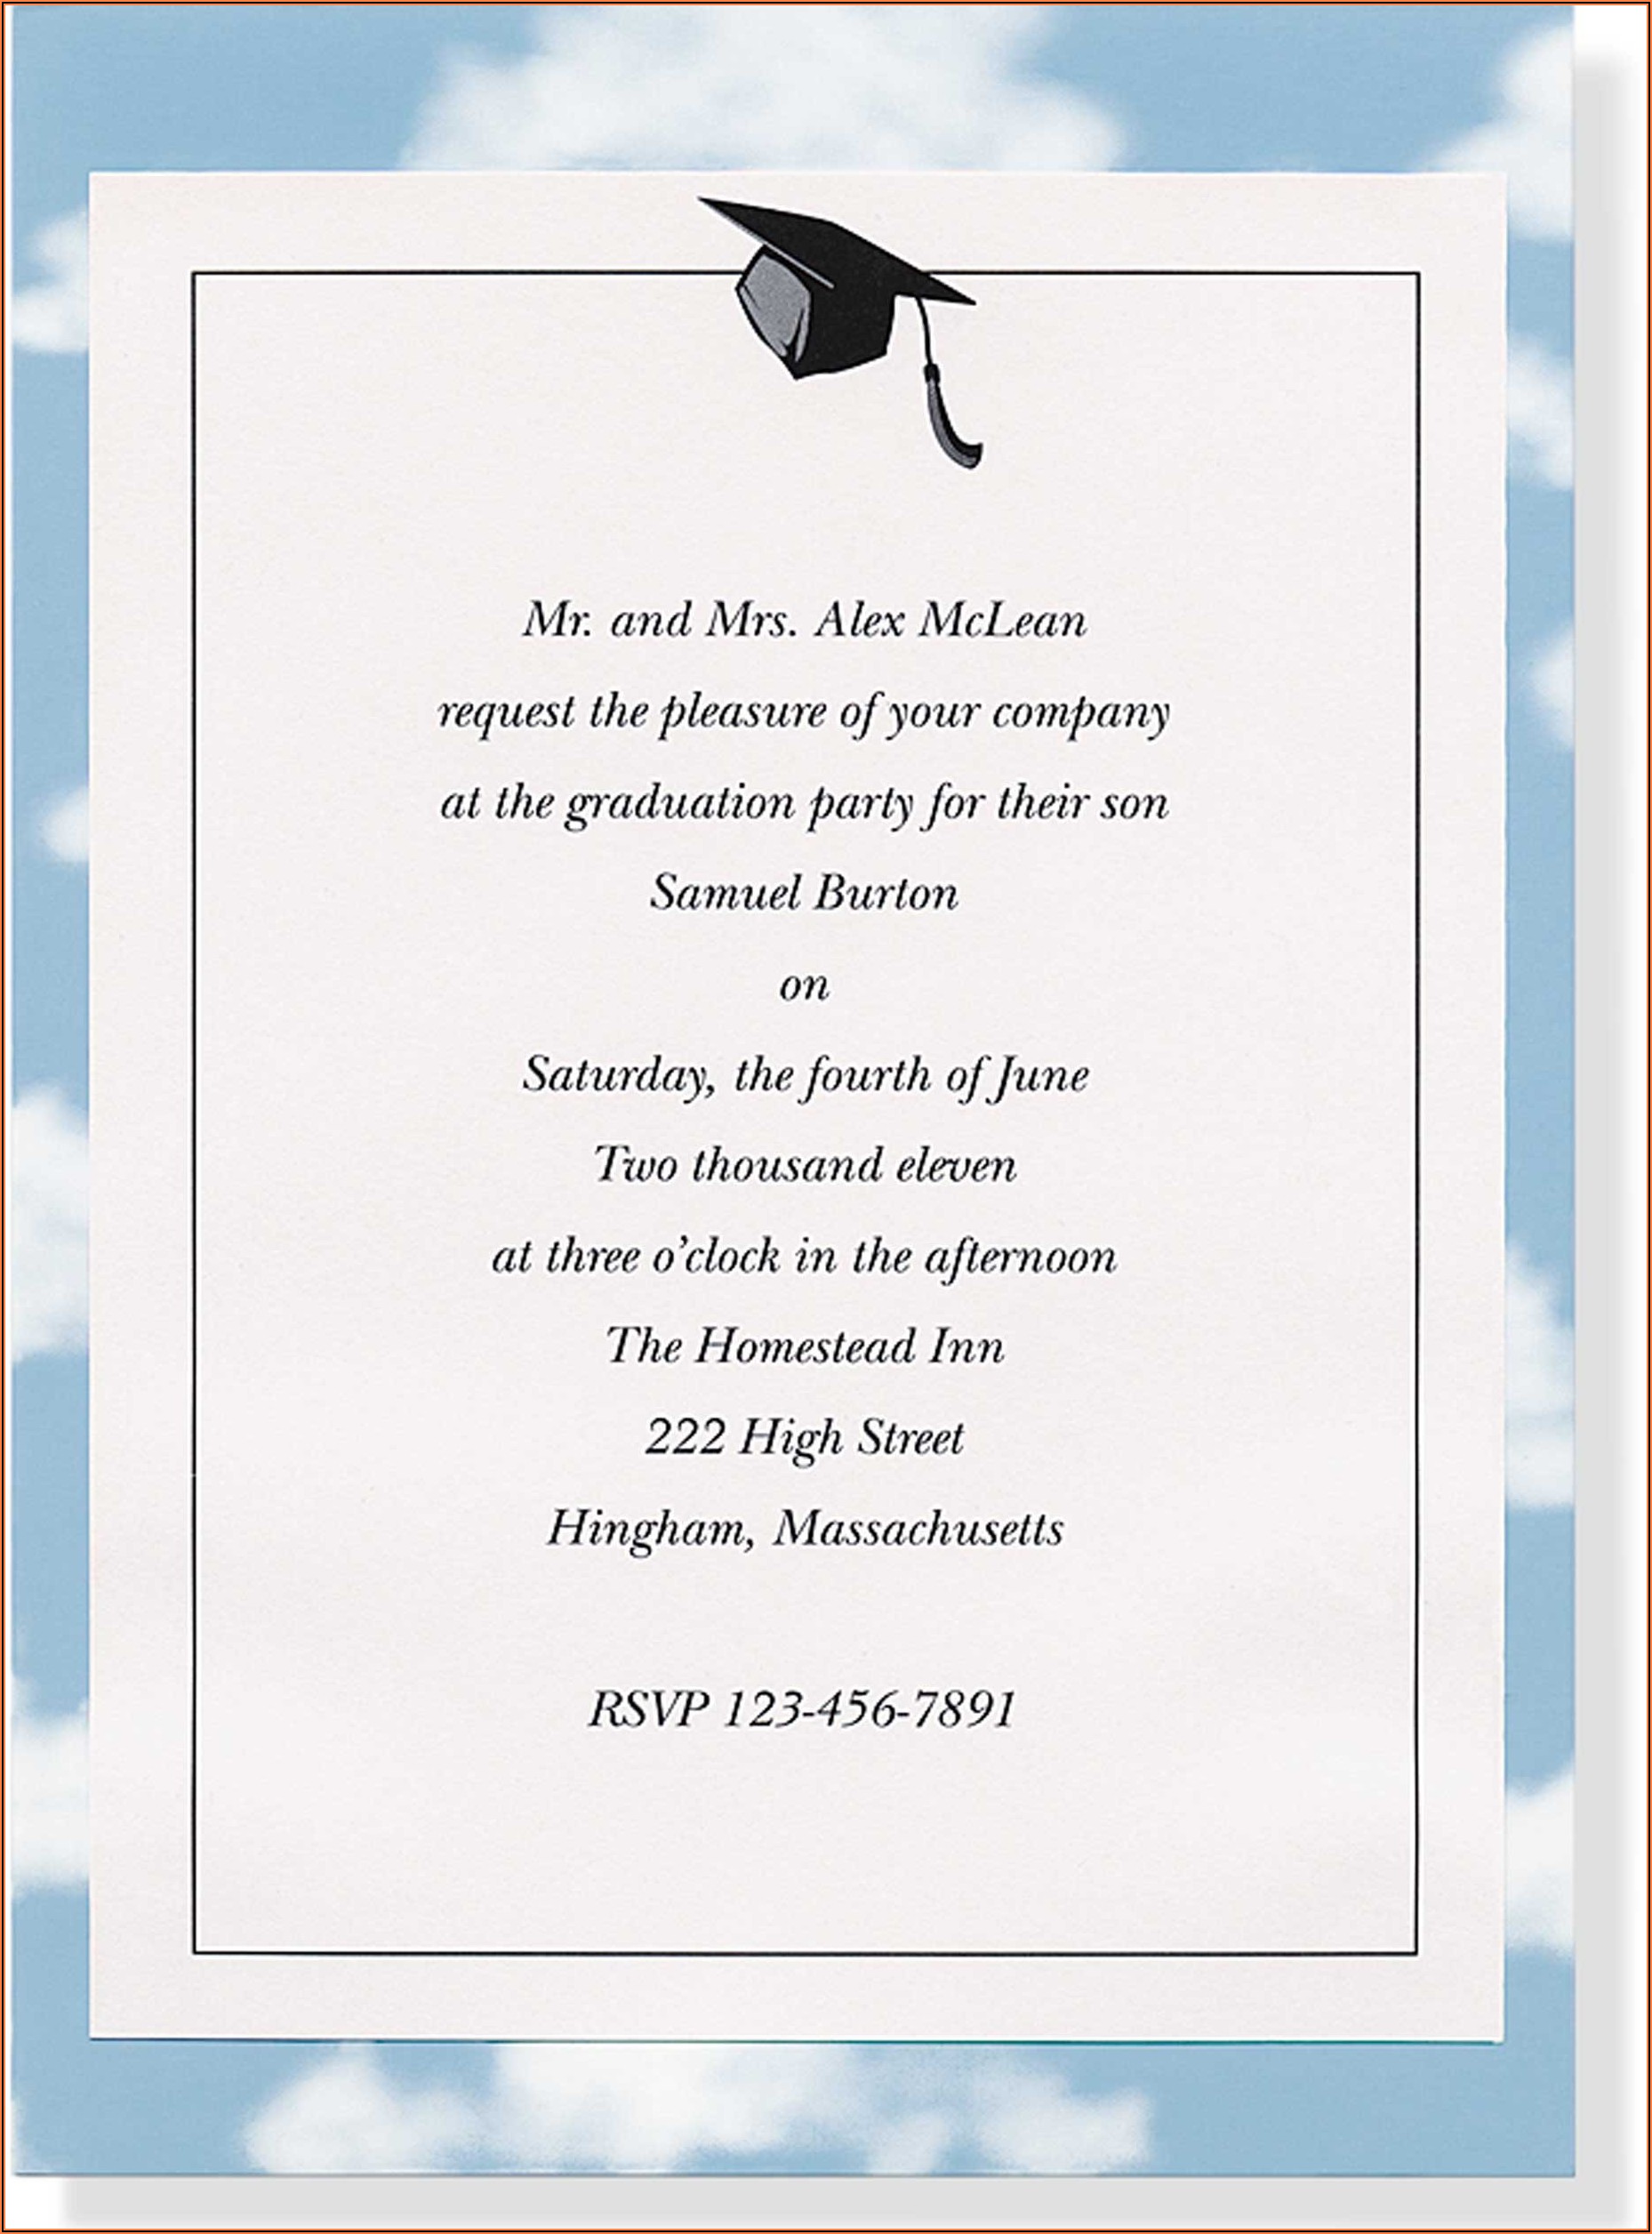 Is There A Difference Between Graduation Announcements And Invitations